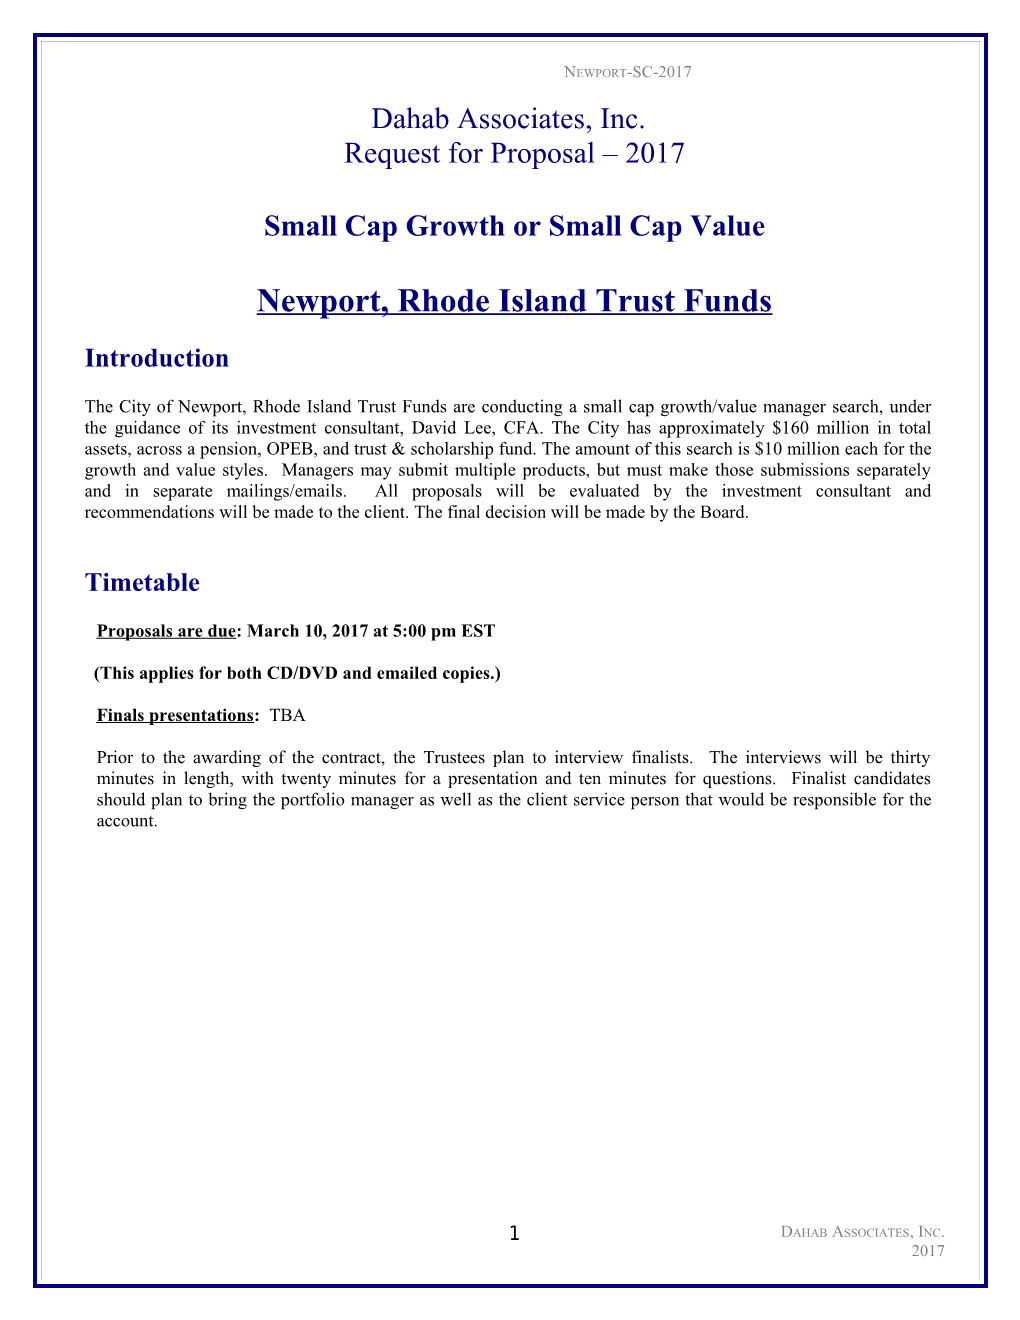 Small Cap Growth Or Small Cap Value